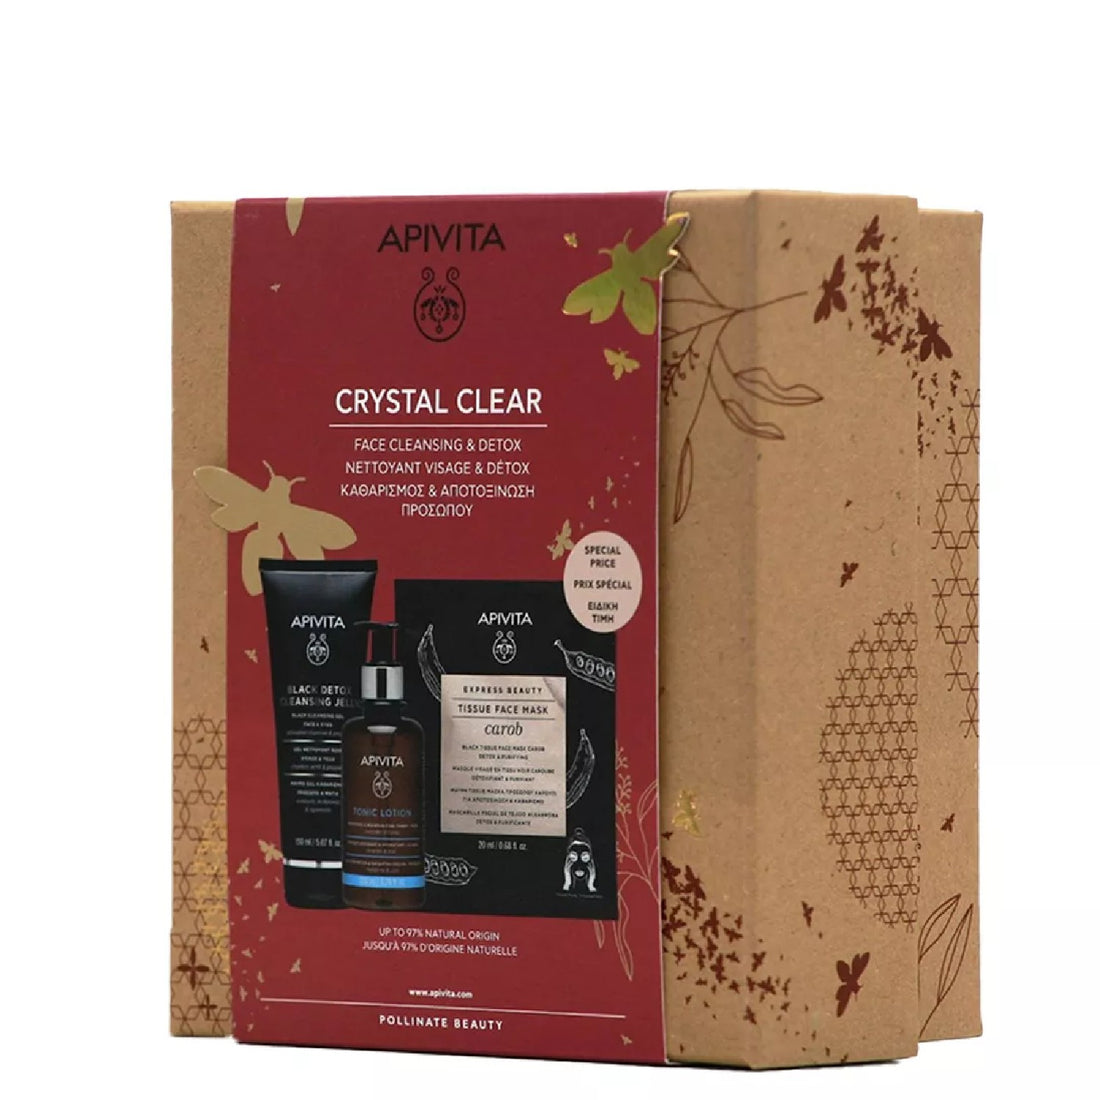 Apivita Crystal Clear, Face Cleansing and Detox set-1*20ml, 1*150ml, 1*200ml